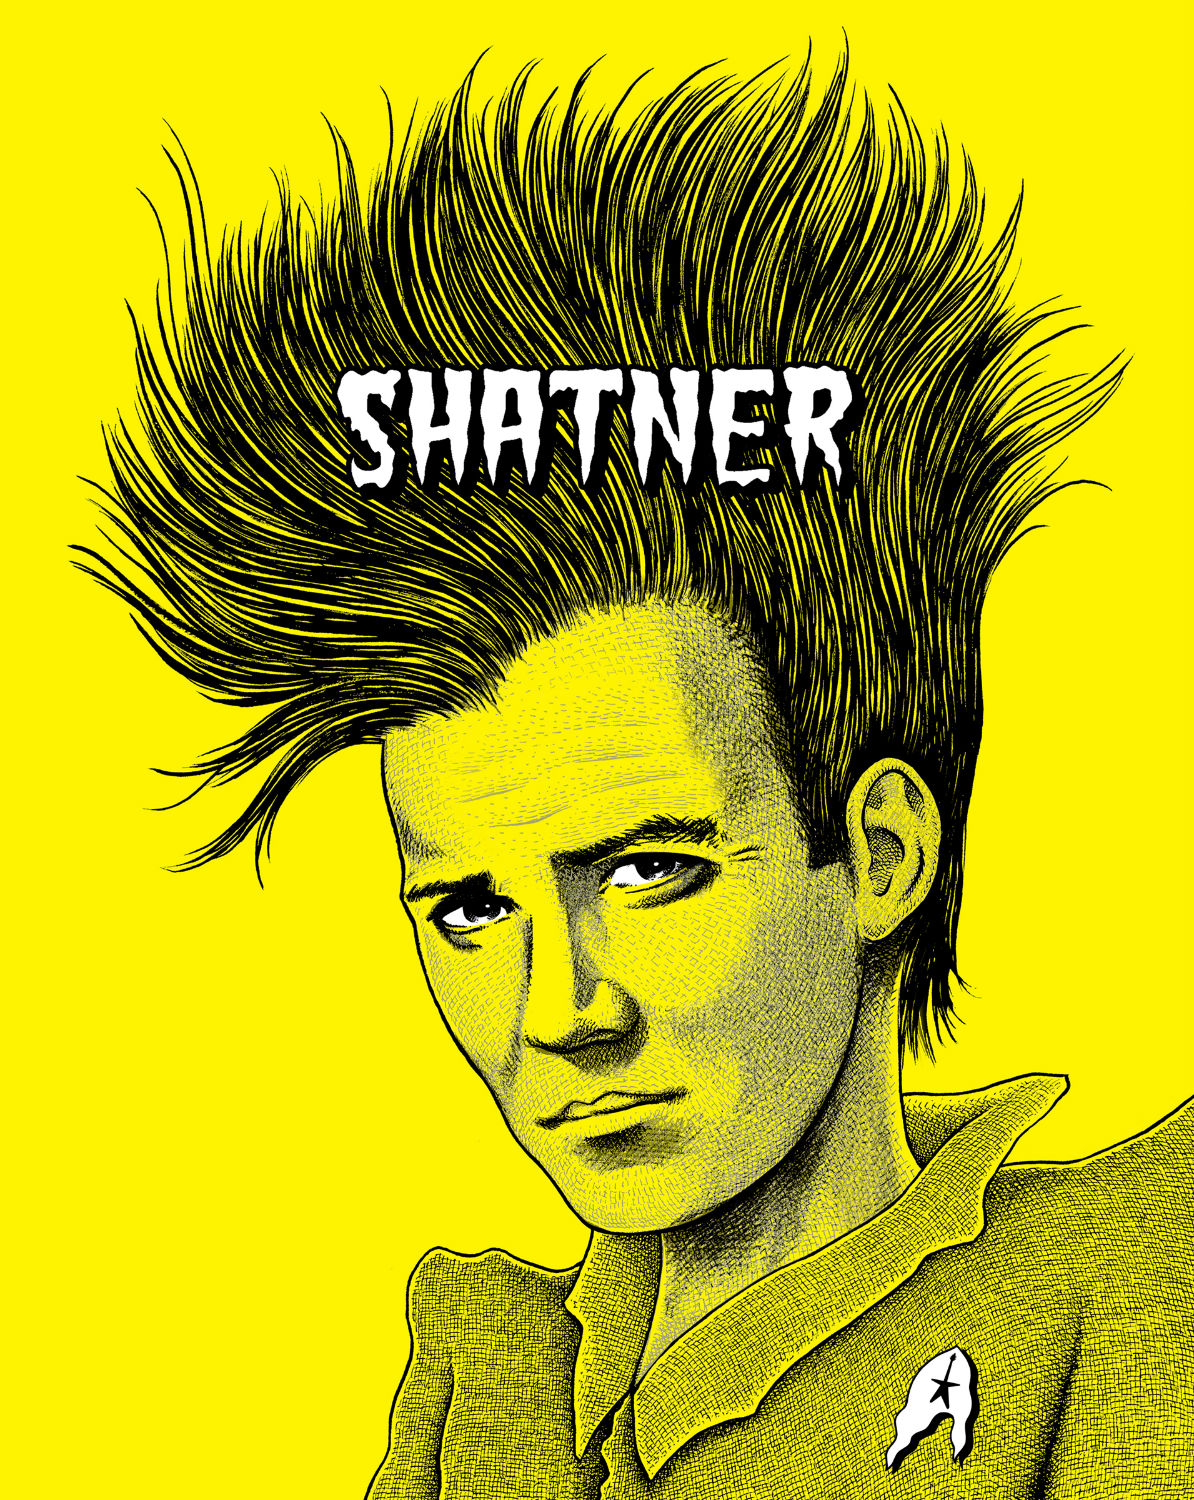 Shatner ‘Covered in Punk’ Artwork by Stephen Blickenstaff © 2018 Caf Muzeck, LLC. All Rights Reserved